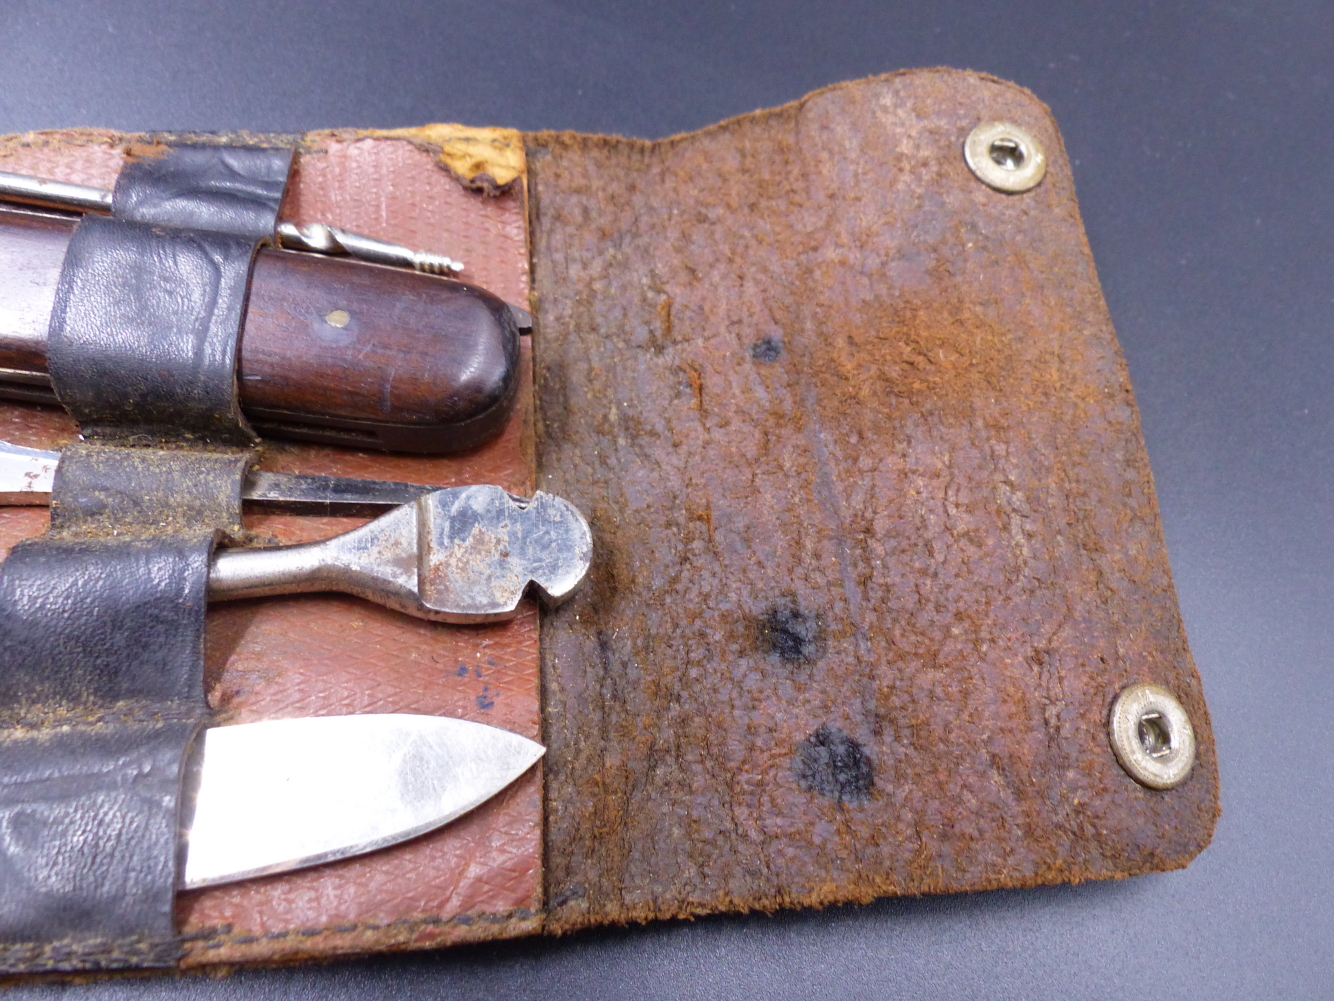 A BONZA TYPE LEATHER CASED TOOL KIT CONTAINING VARIOUS TOOLS AND IMPLEMENTS. - Image 6 of 9